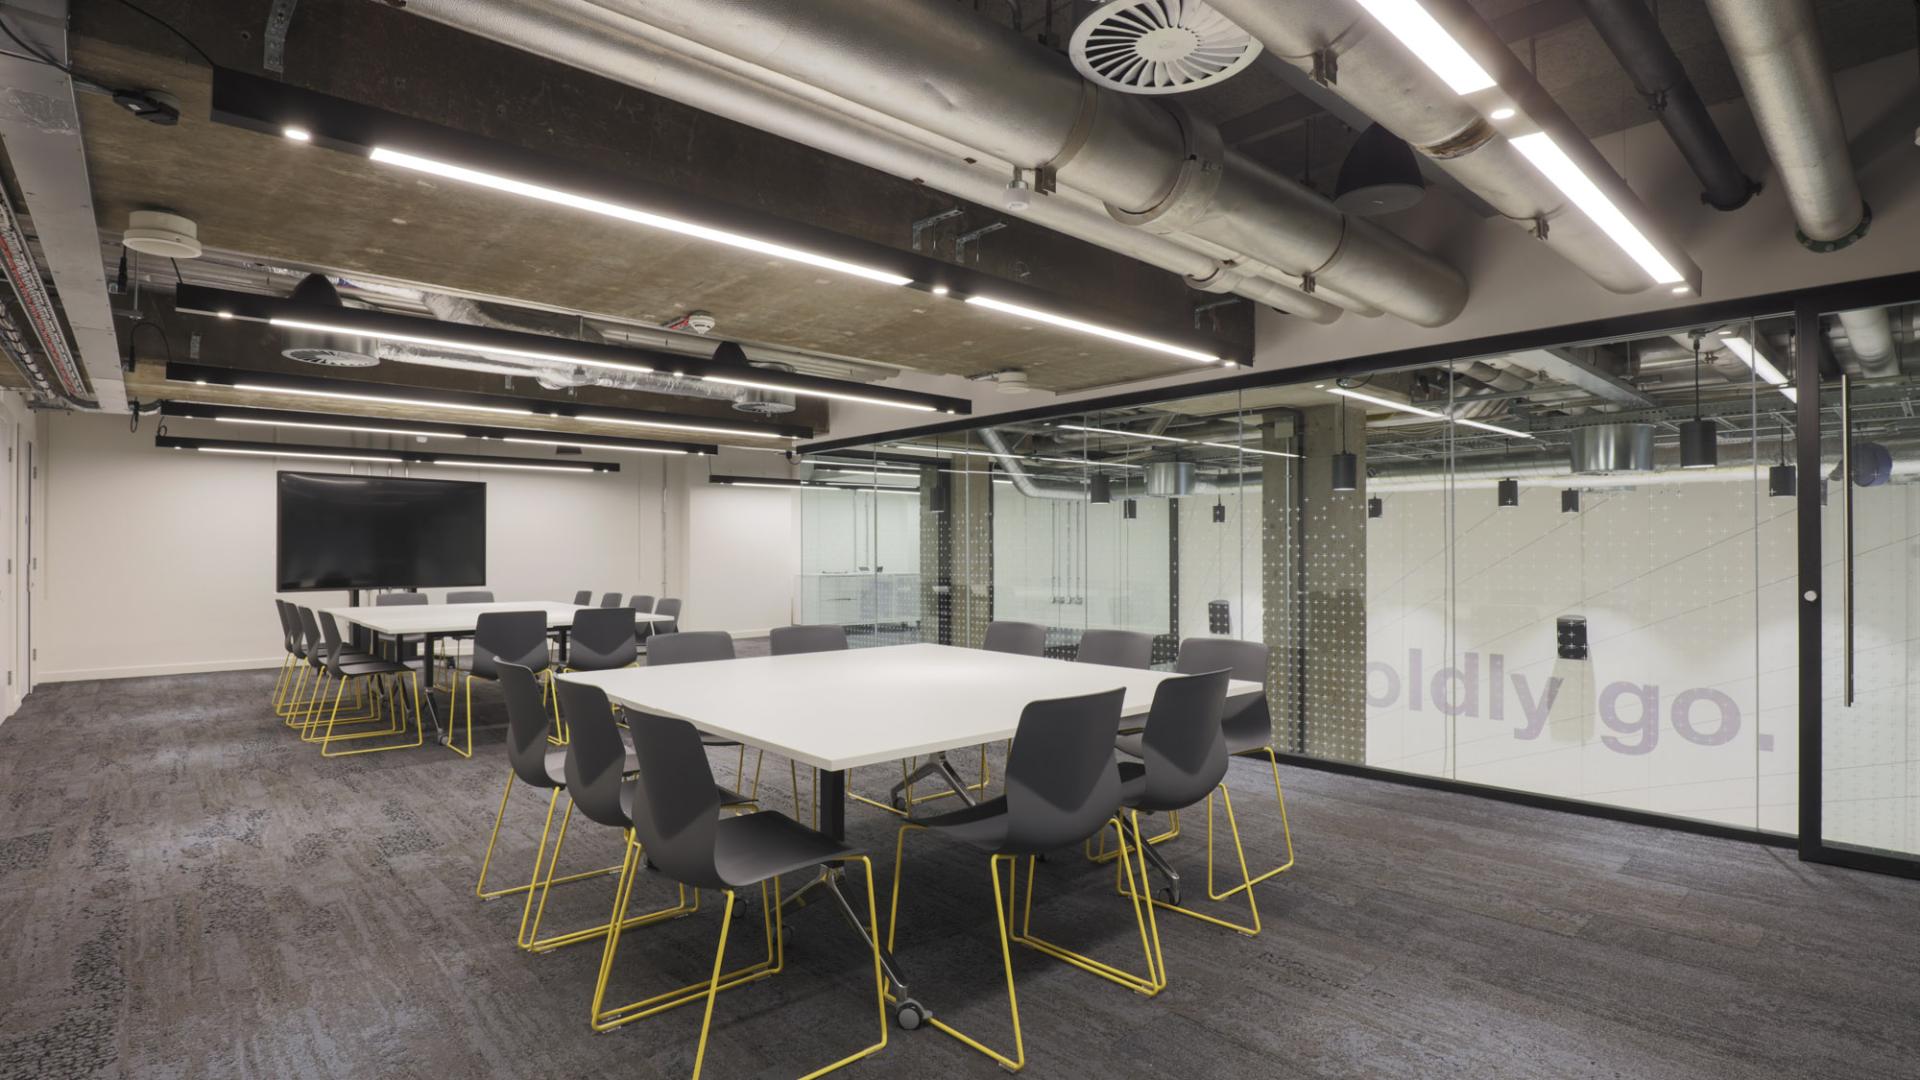 Meeting Rooms for Hire in North London